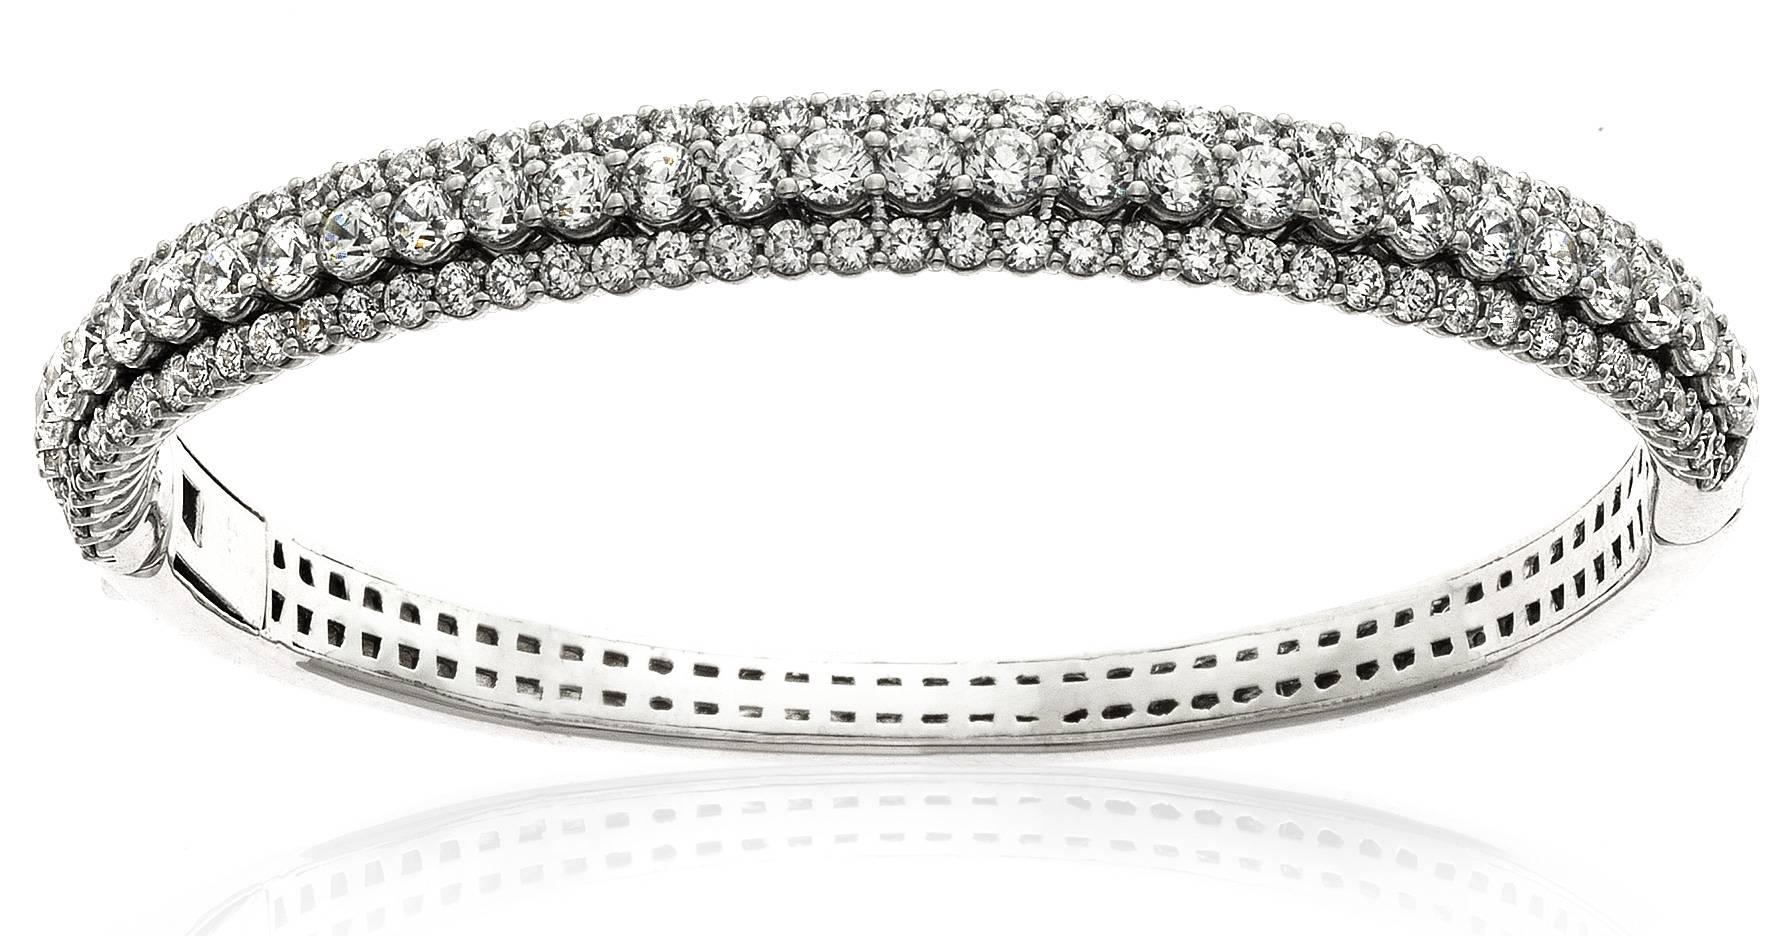 Fits most wrist sizes. 
116 round conflict free diamonds totaling 7.50ct t.w.
F-G color 
Vs2-si1 clarity
Excellent makes